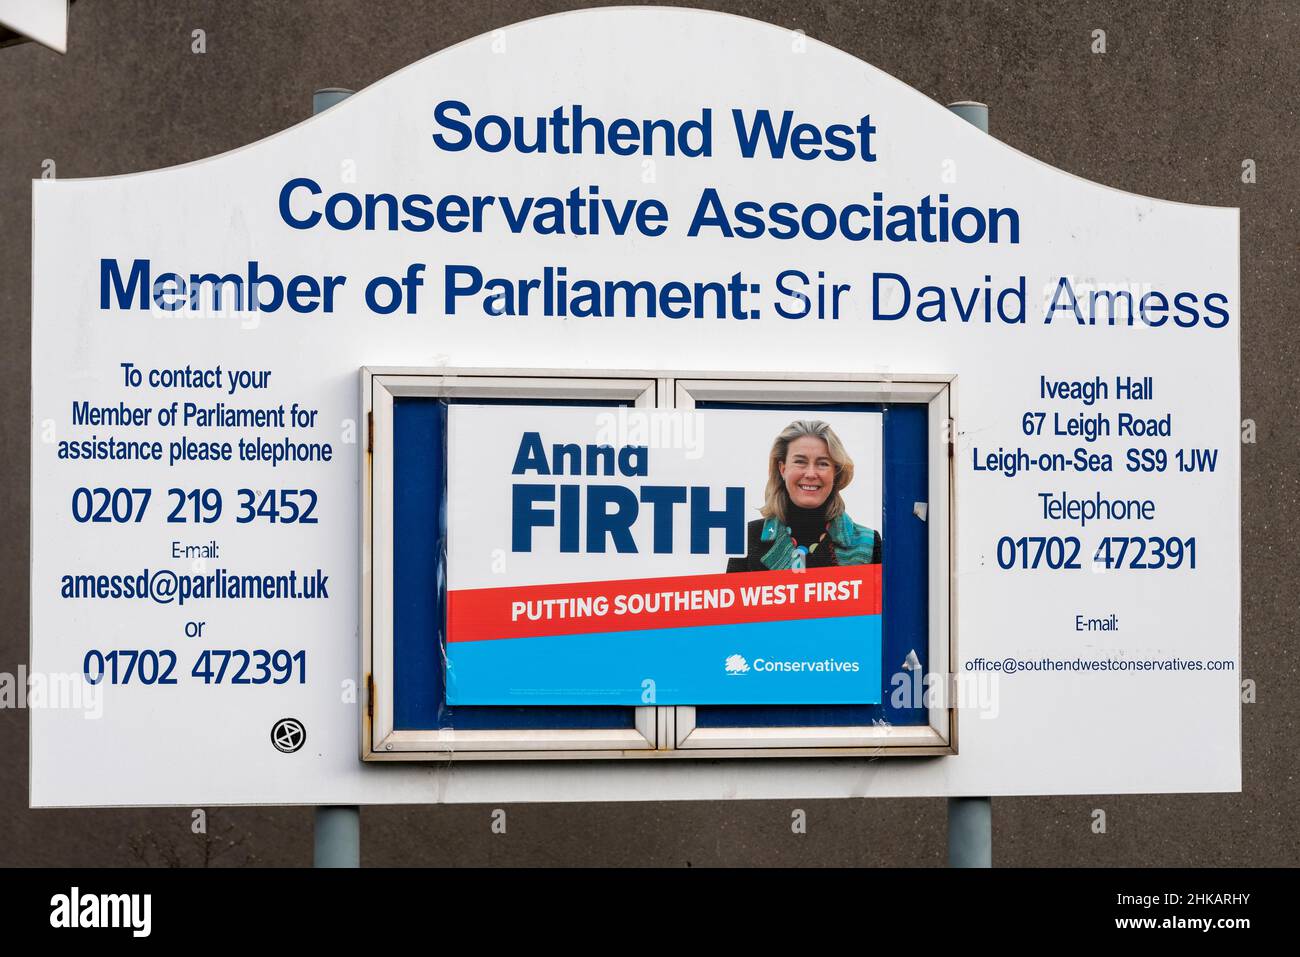 Southend on Sea, Essex, UK. 3rd Feb, 2022. Polling stations in local churches and schools have opened for voters in the Southend West by-election to replace murdered MP Sir David Amess. Although the main parties stood aside to allow the Conservative candidate Anna Firth to take the seat unopposed, a number of other parties are standing, including UKIP, Freedom Alliance, English Democrats, English Constitution Party and Independents. Conservative Association Iveagh Hall campaign centre, Leigh Road, Leigh on Sea Stock Photo